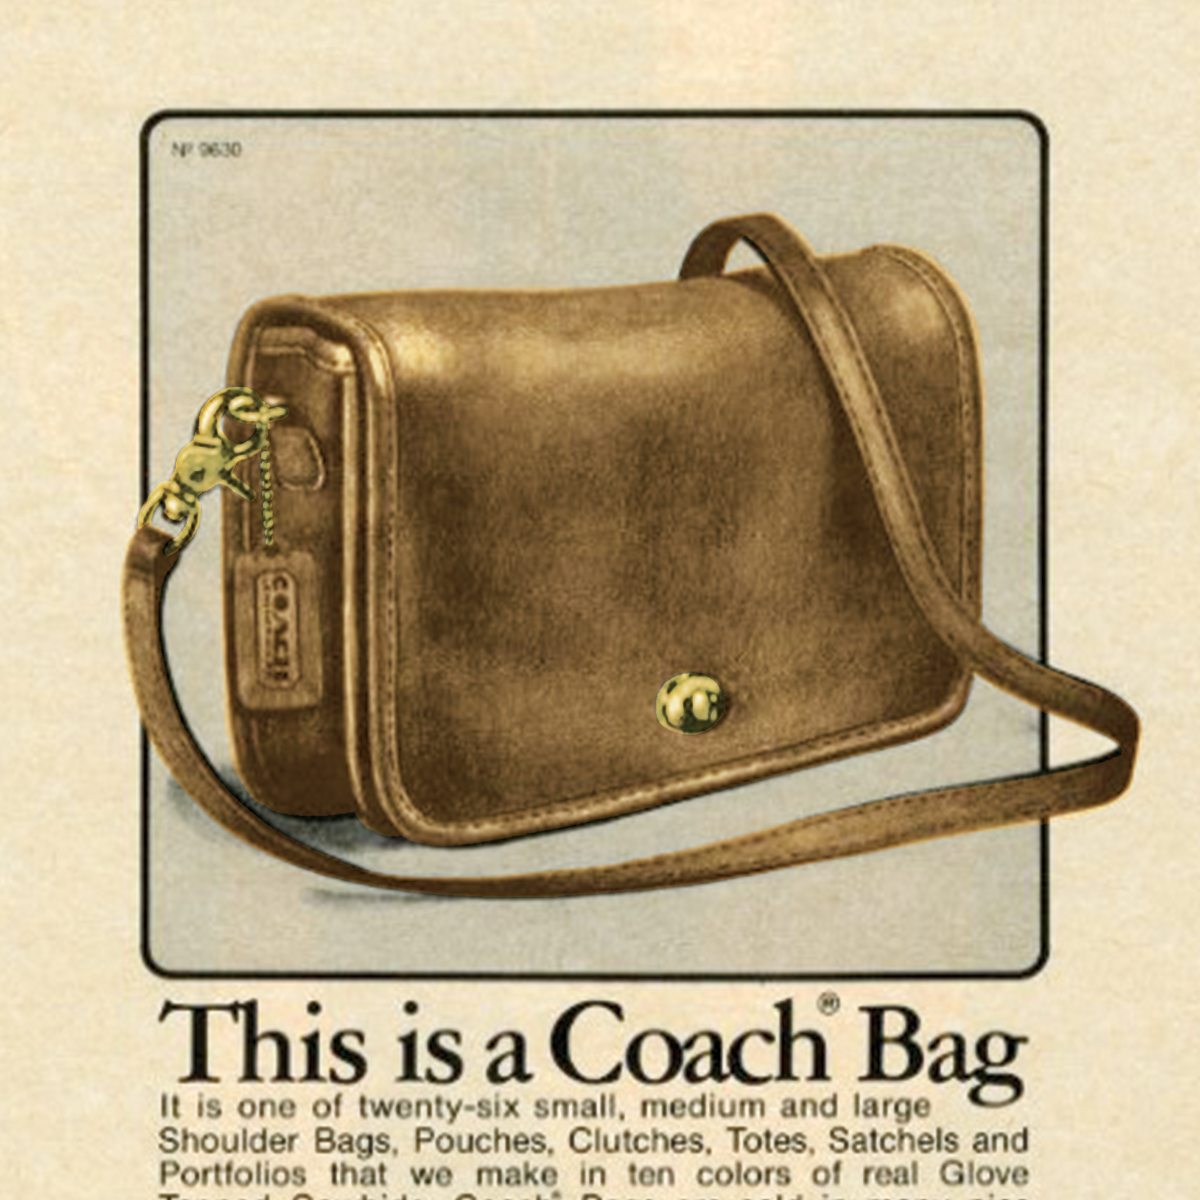 This Old Bag's Got More Old Bags! More Vintage Bag Love. Coach Has Returned  into My Life